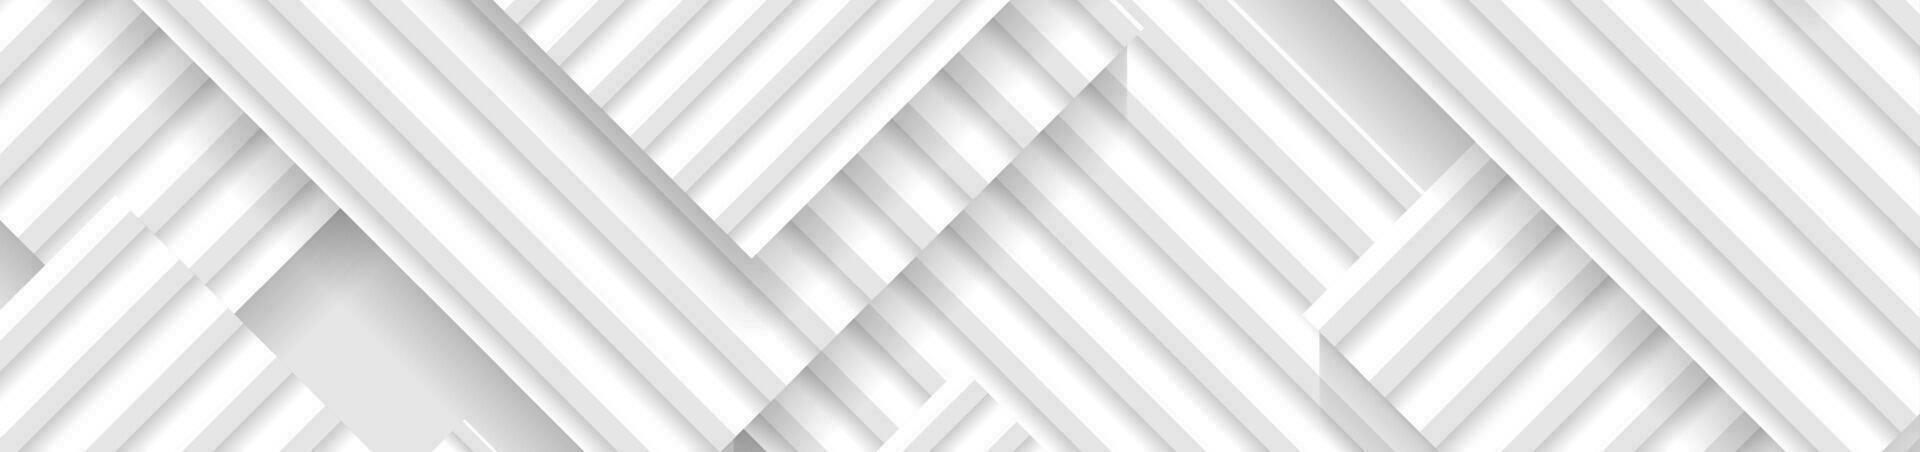 Abstract minimal background with grey and white stripes vector